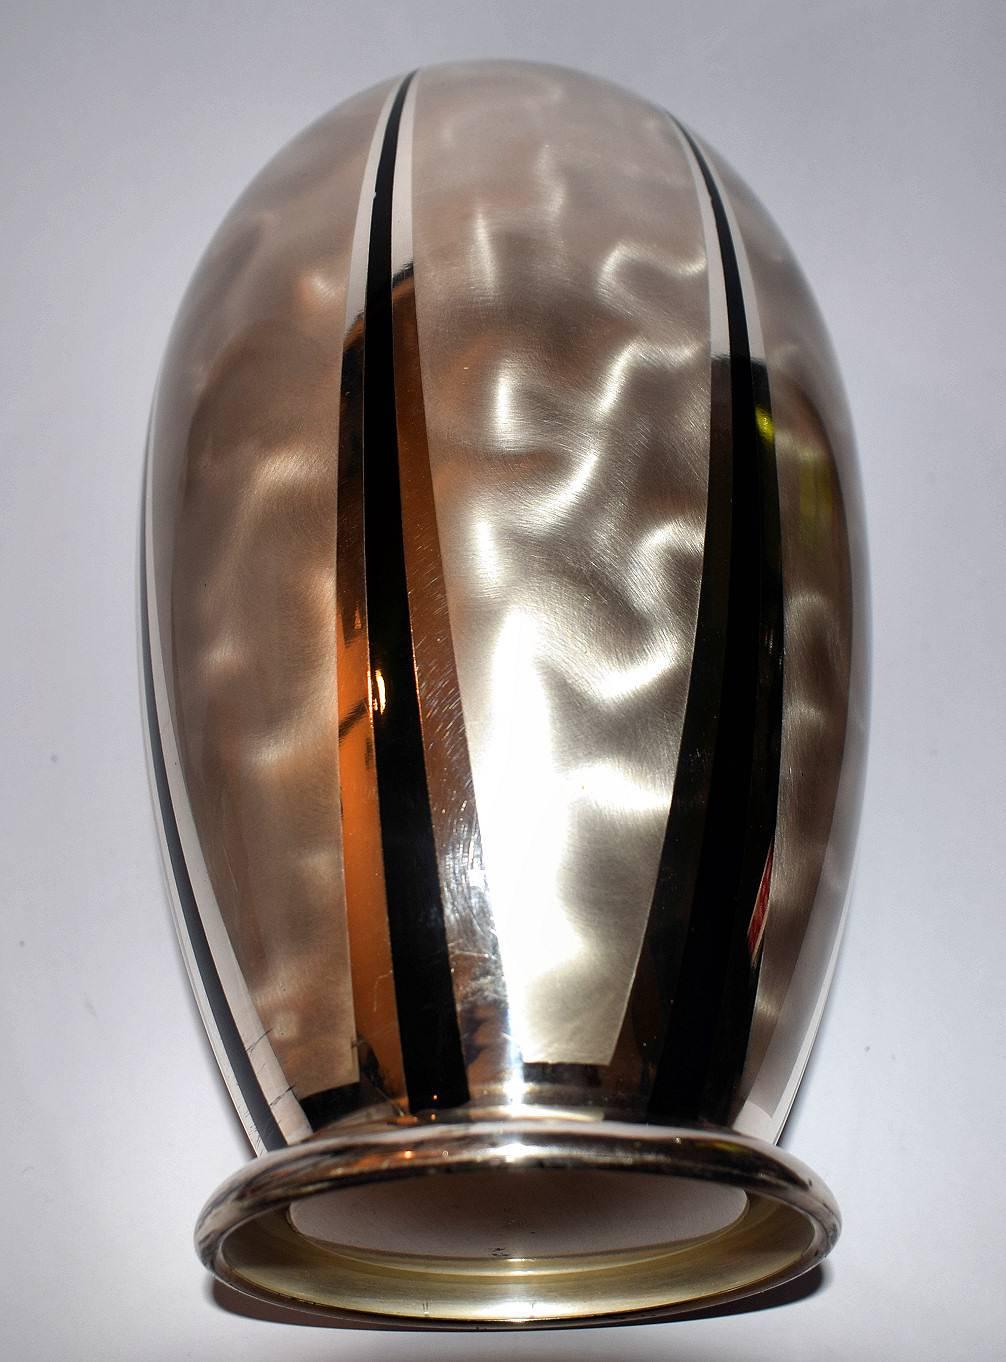 Very stylish Art Deco WMF Ikora vase designed in 1934. The black stripes in the decor are inlay enamel. You can find this design in a WMF Ikora catalog dated about 1934. Signed with the manufacturers mark and Ikora Silver plate Germany. In lovely